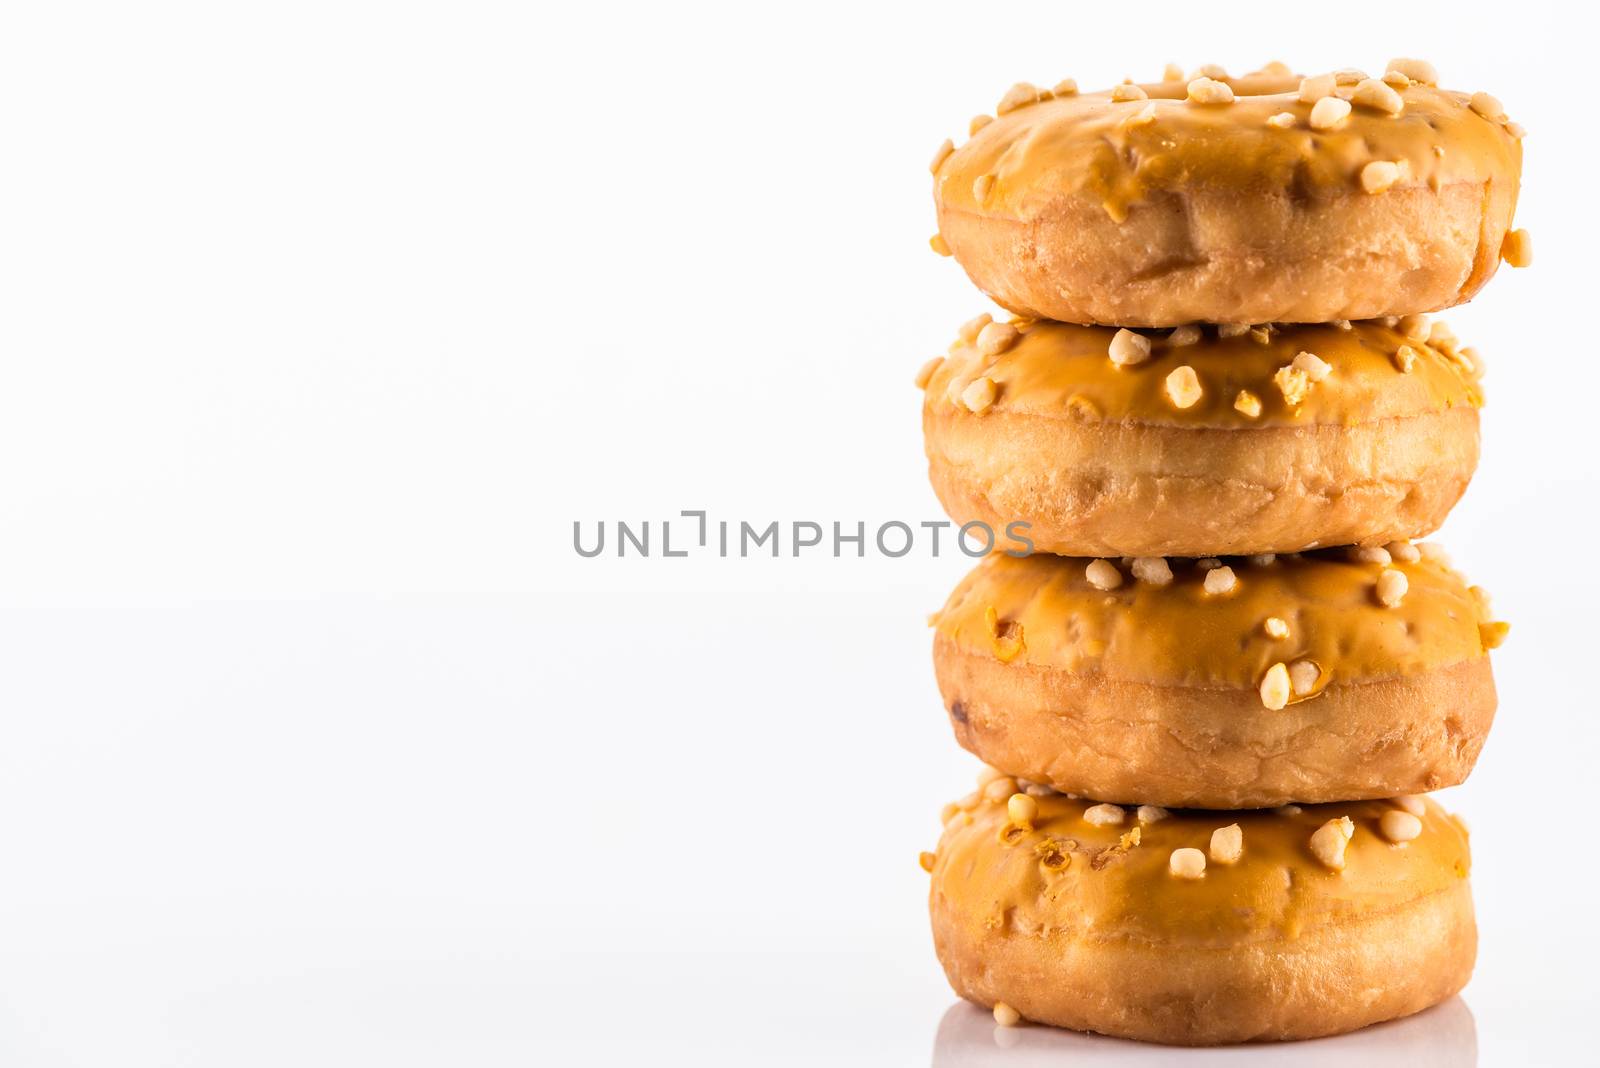 Salted Caramel Donut or Doughnuts on White Reflective Background with Copy Space.